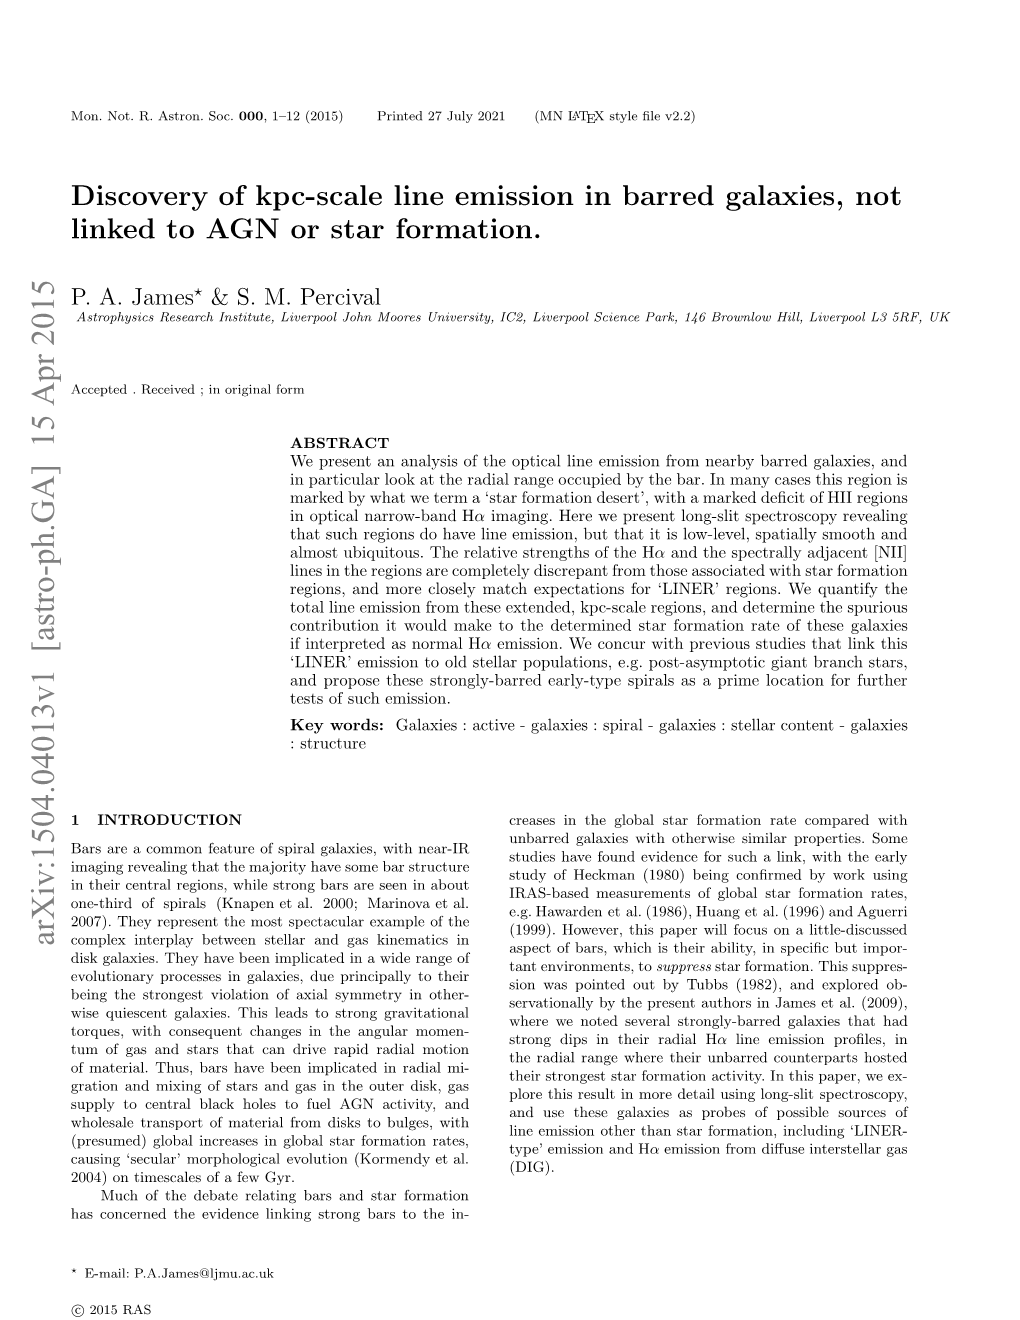 Discovery of Kpc-Scale Line Emission in Barred Galaxies, Not Linked To